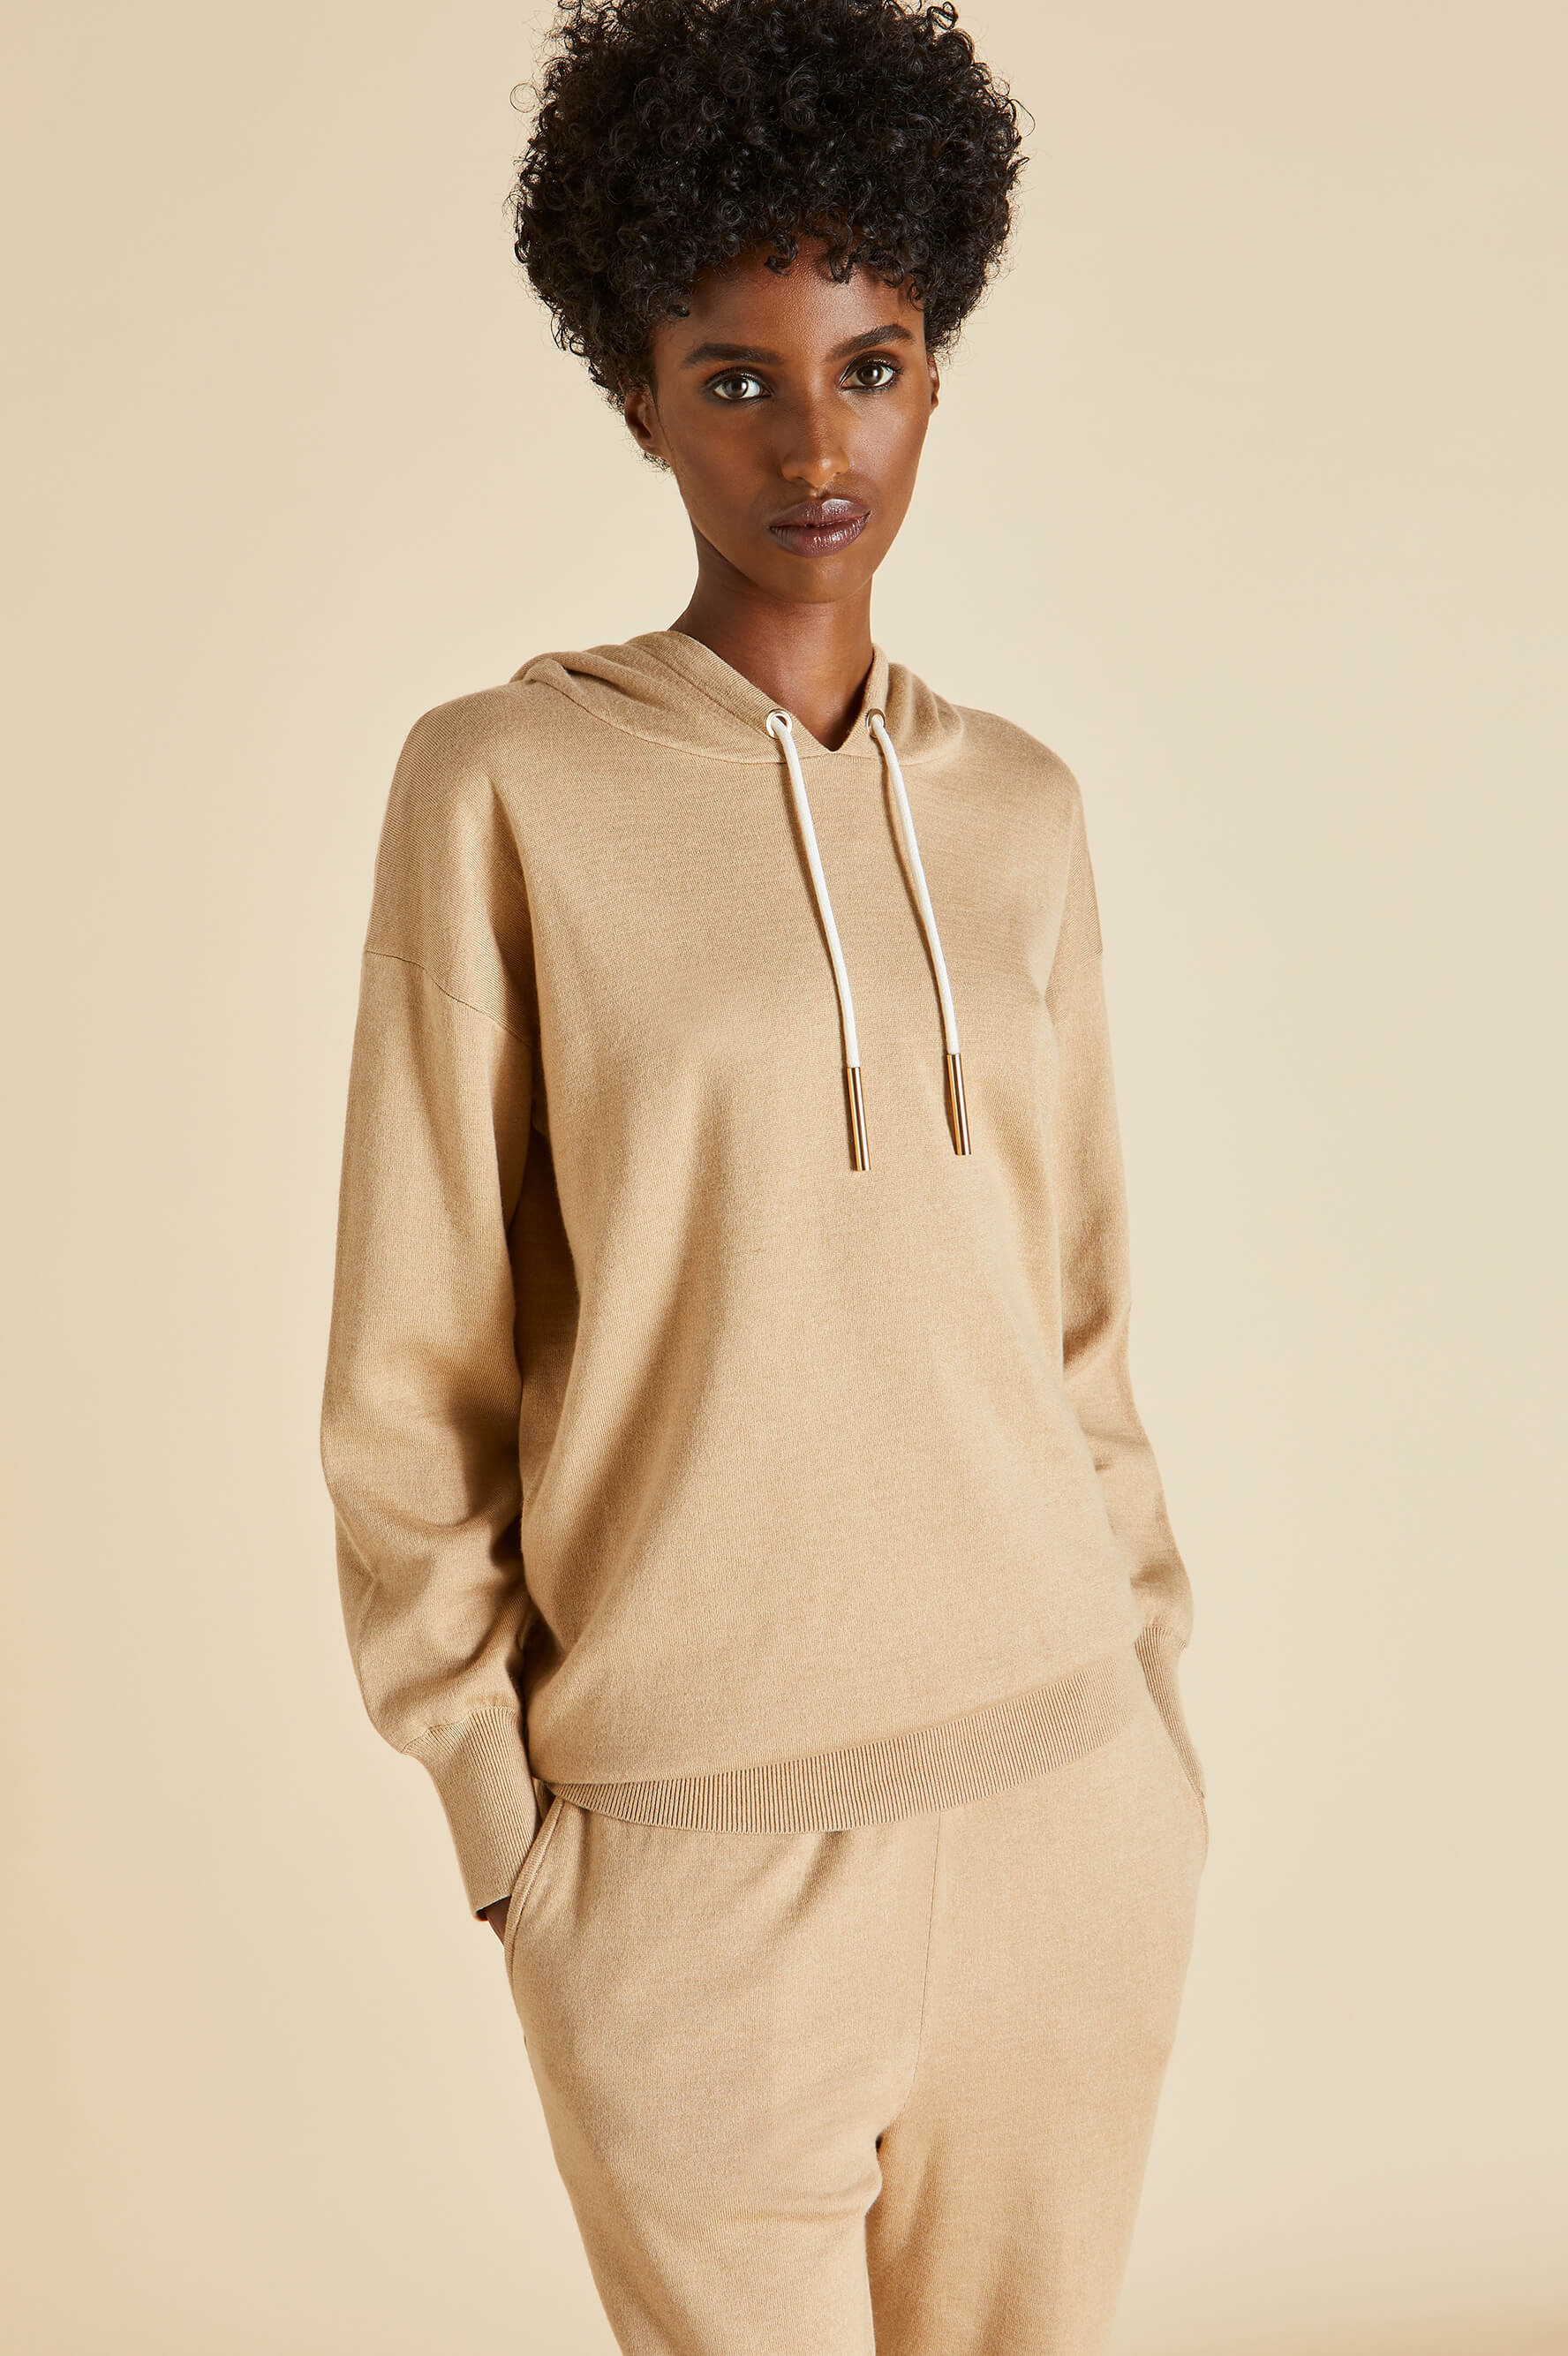 The Camel Silk-Cashmere Tracksuit - The Ultimate In Luxury Loungewear